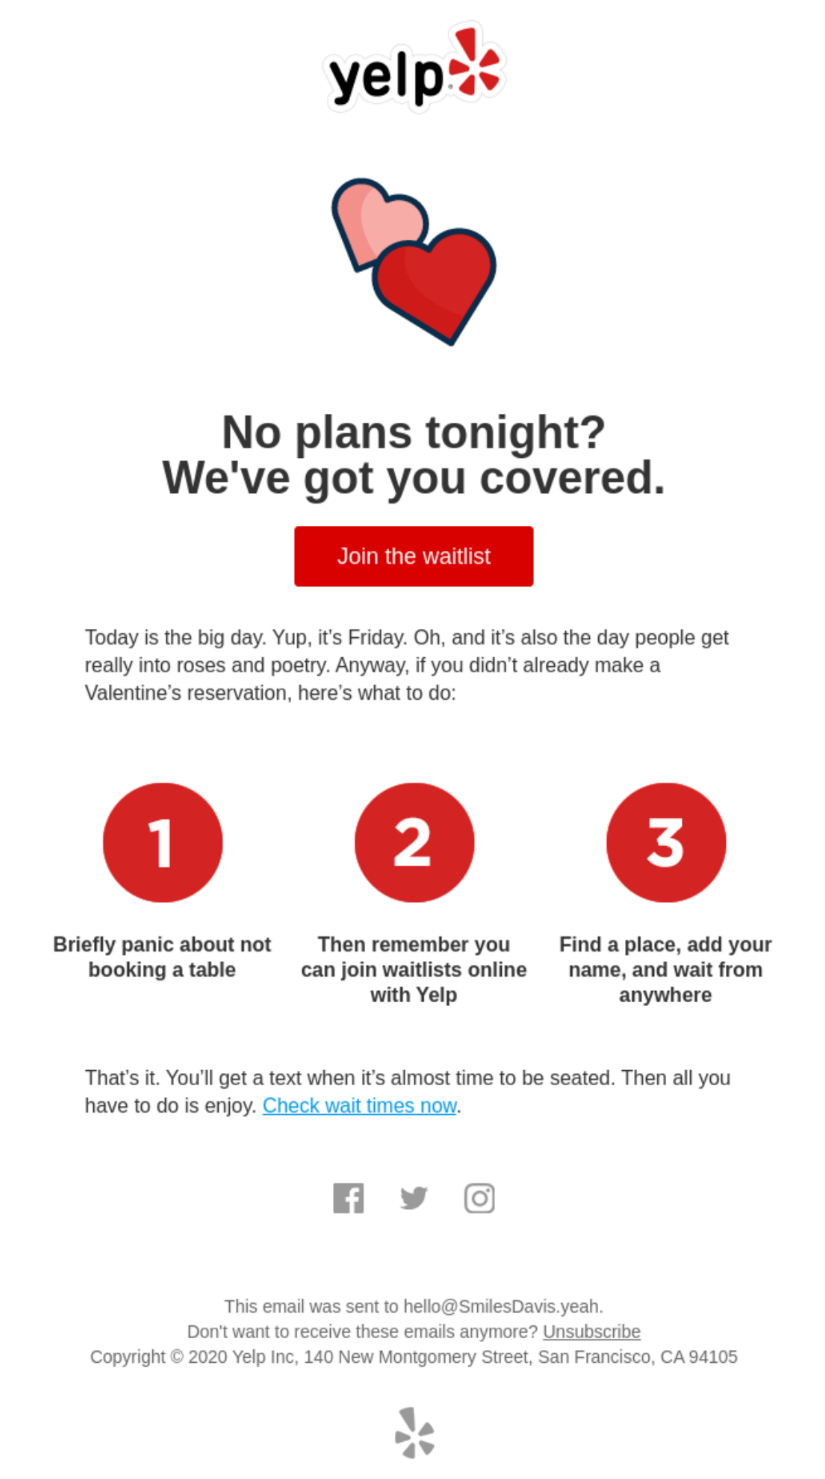 Valentine’s Day email from Yelp with the banner text “No plans tonight? We’ve got you covered.”